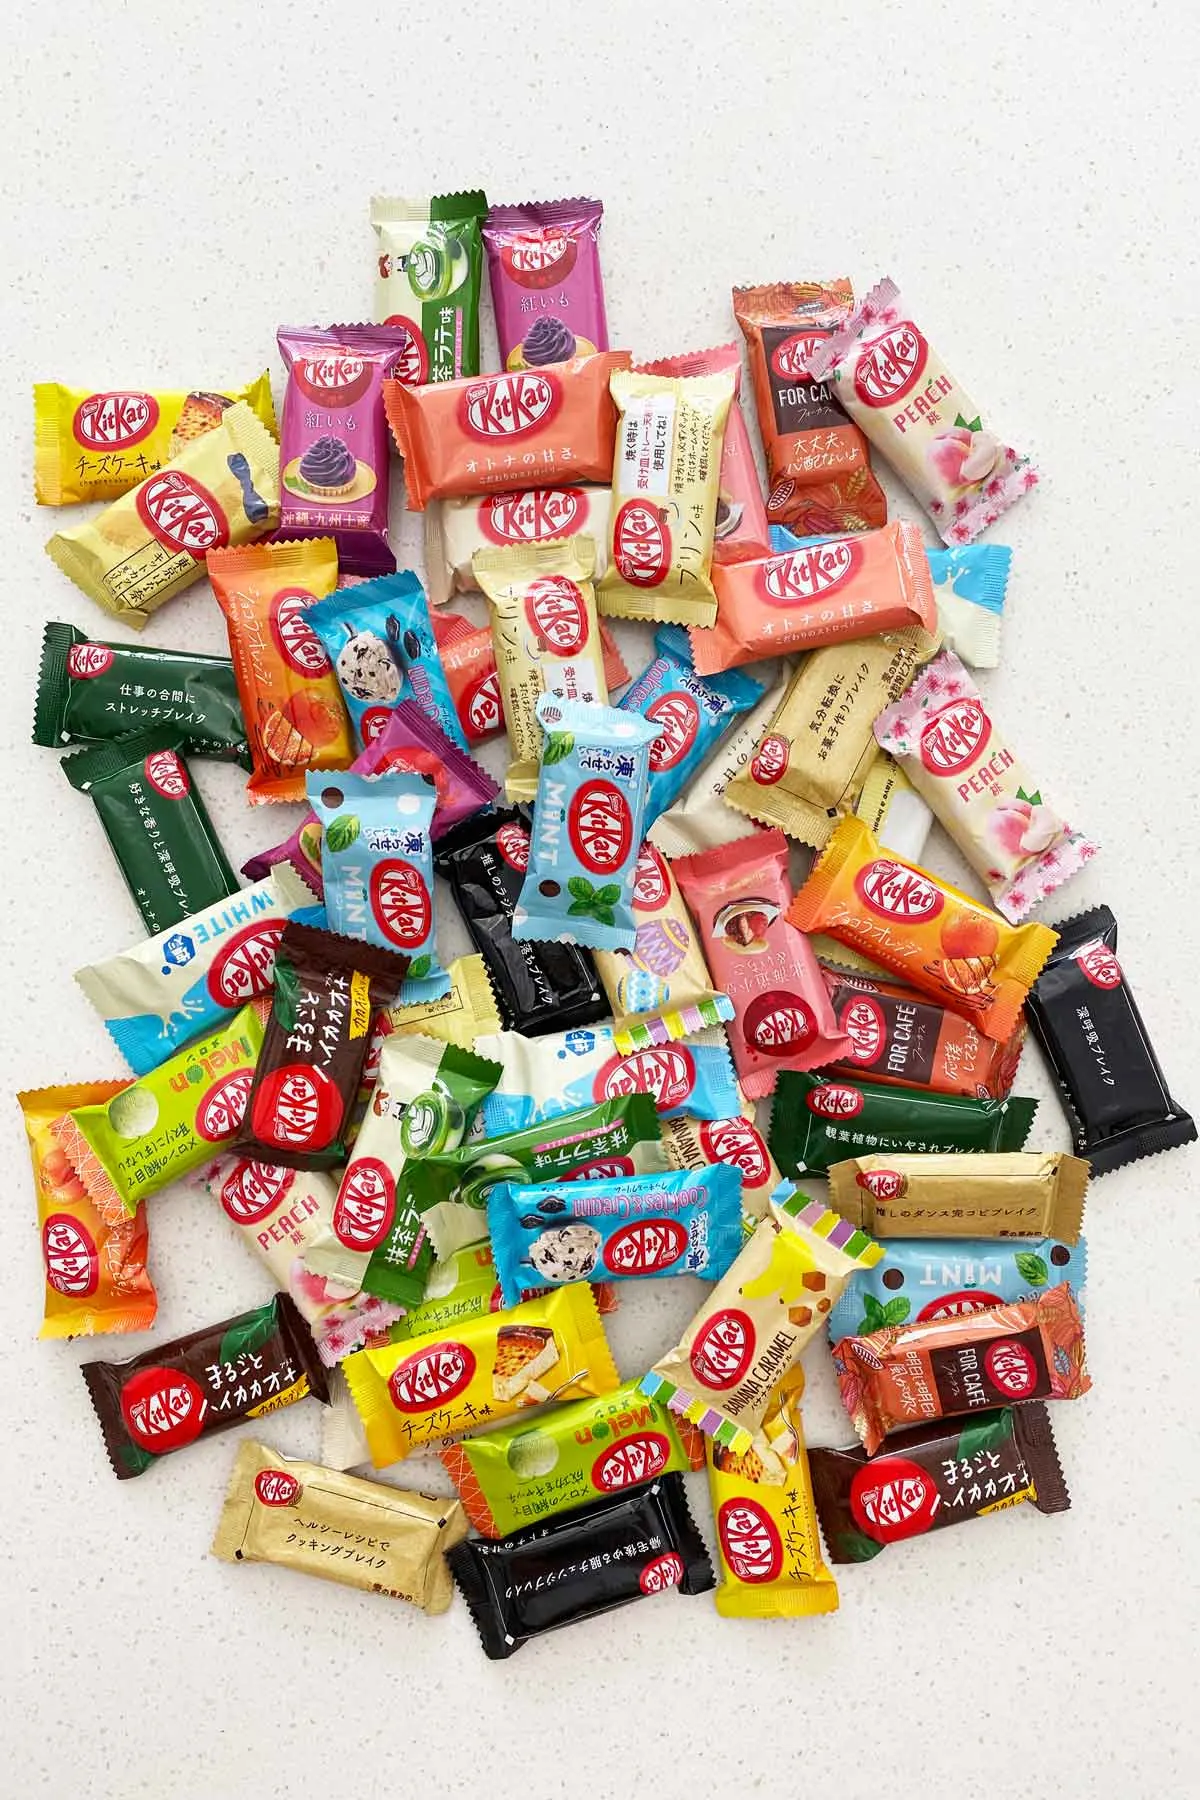 snack sized kitkats in many flavours on white stone benchtop